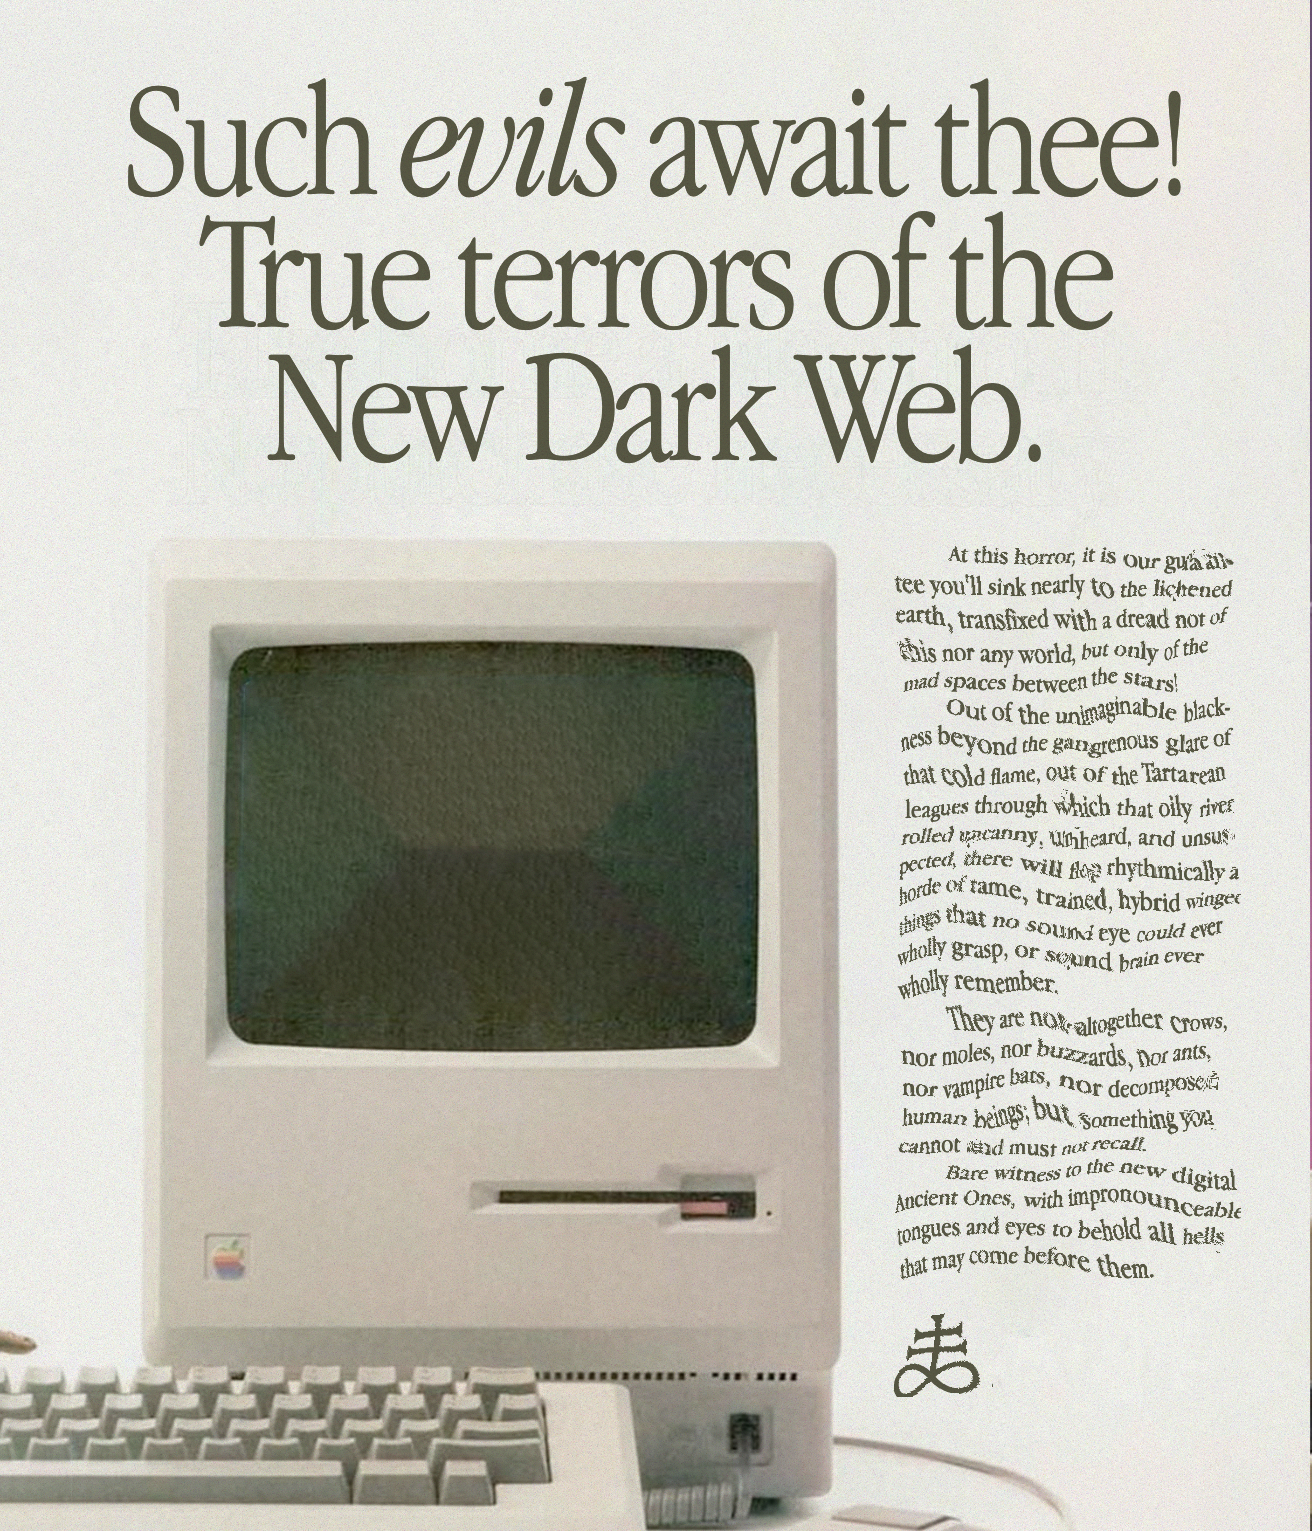 A retro computer advertisement rendered in HTML featuring SVG-distorted text